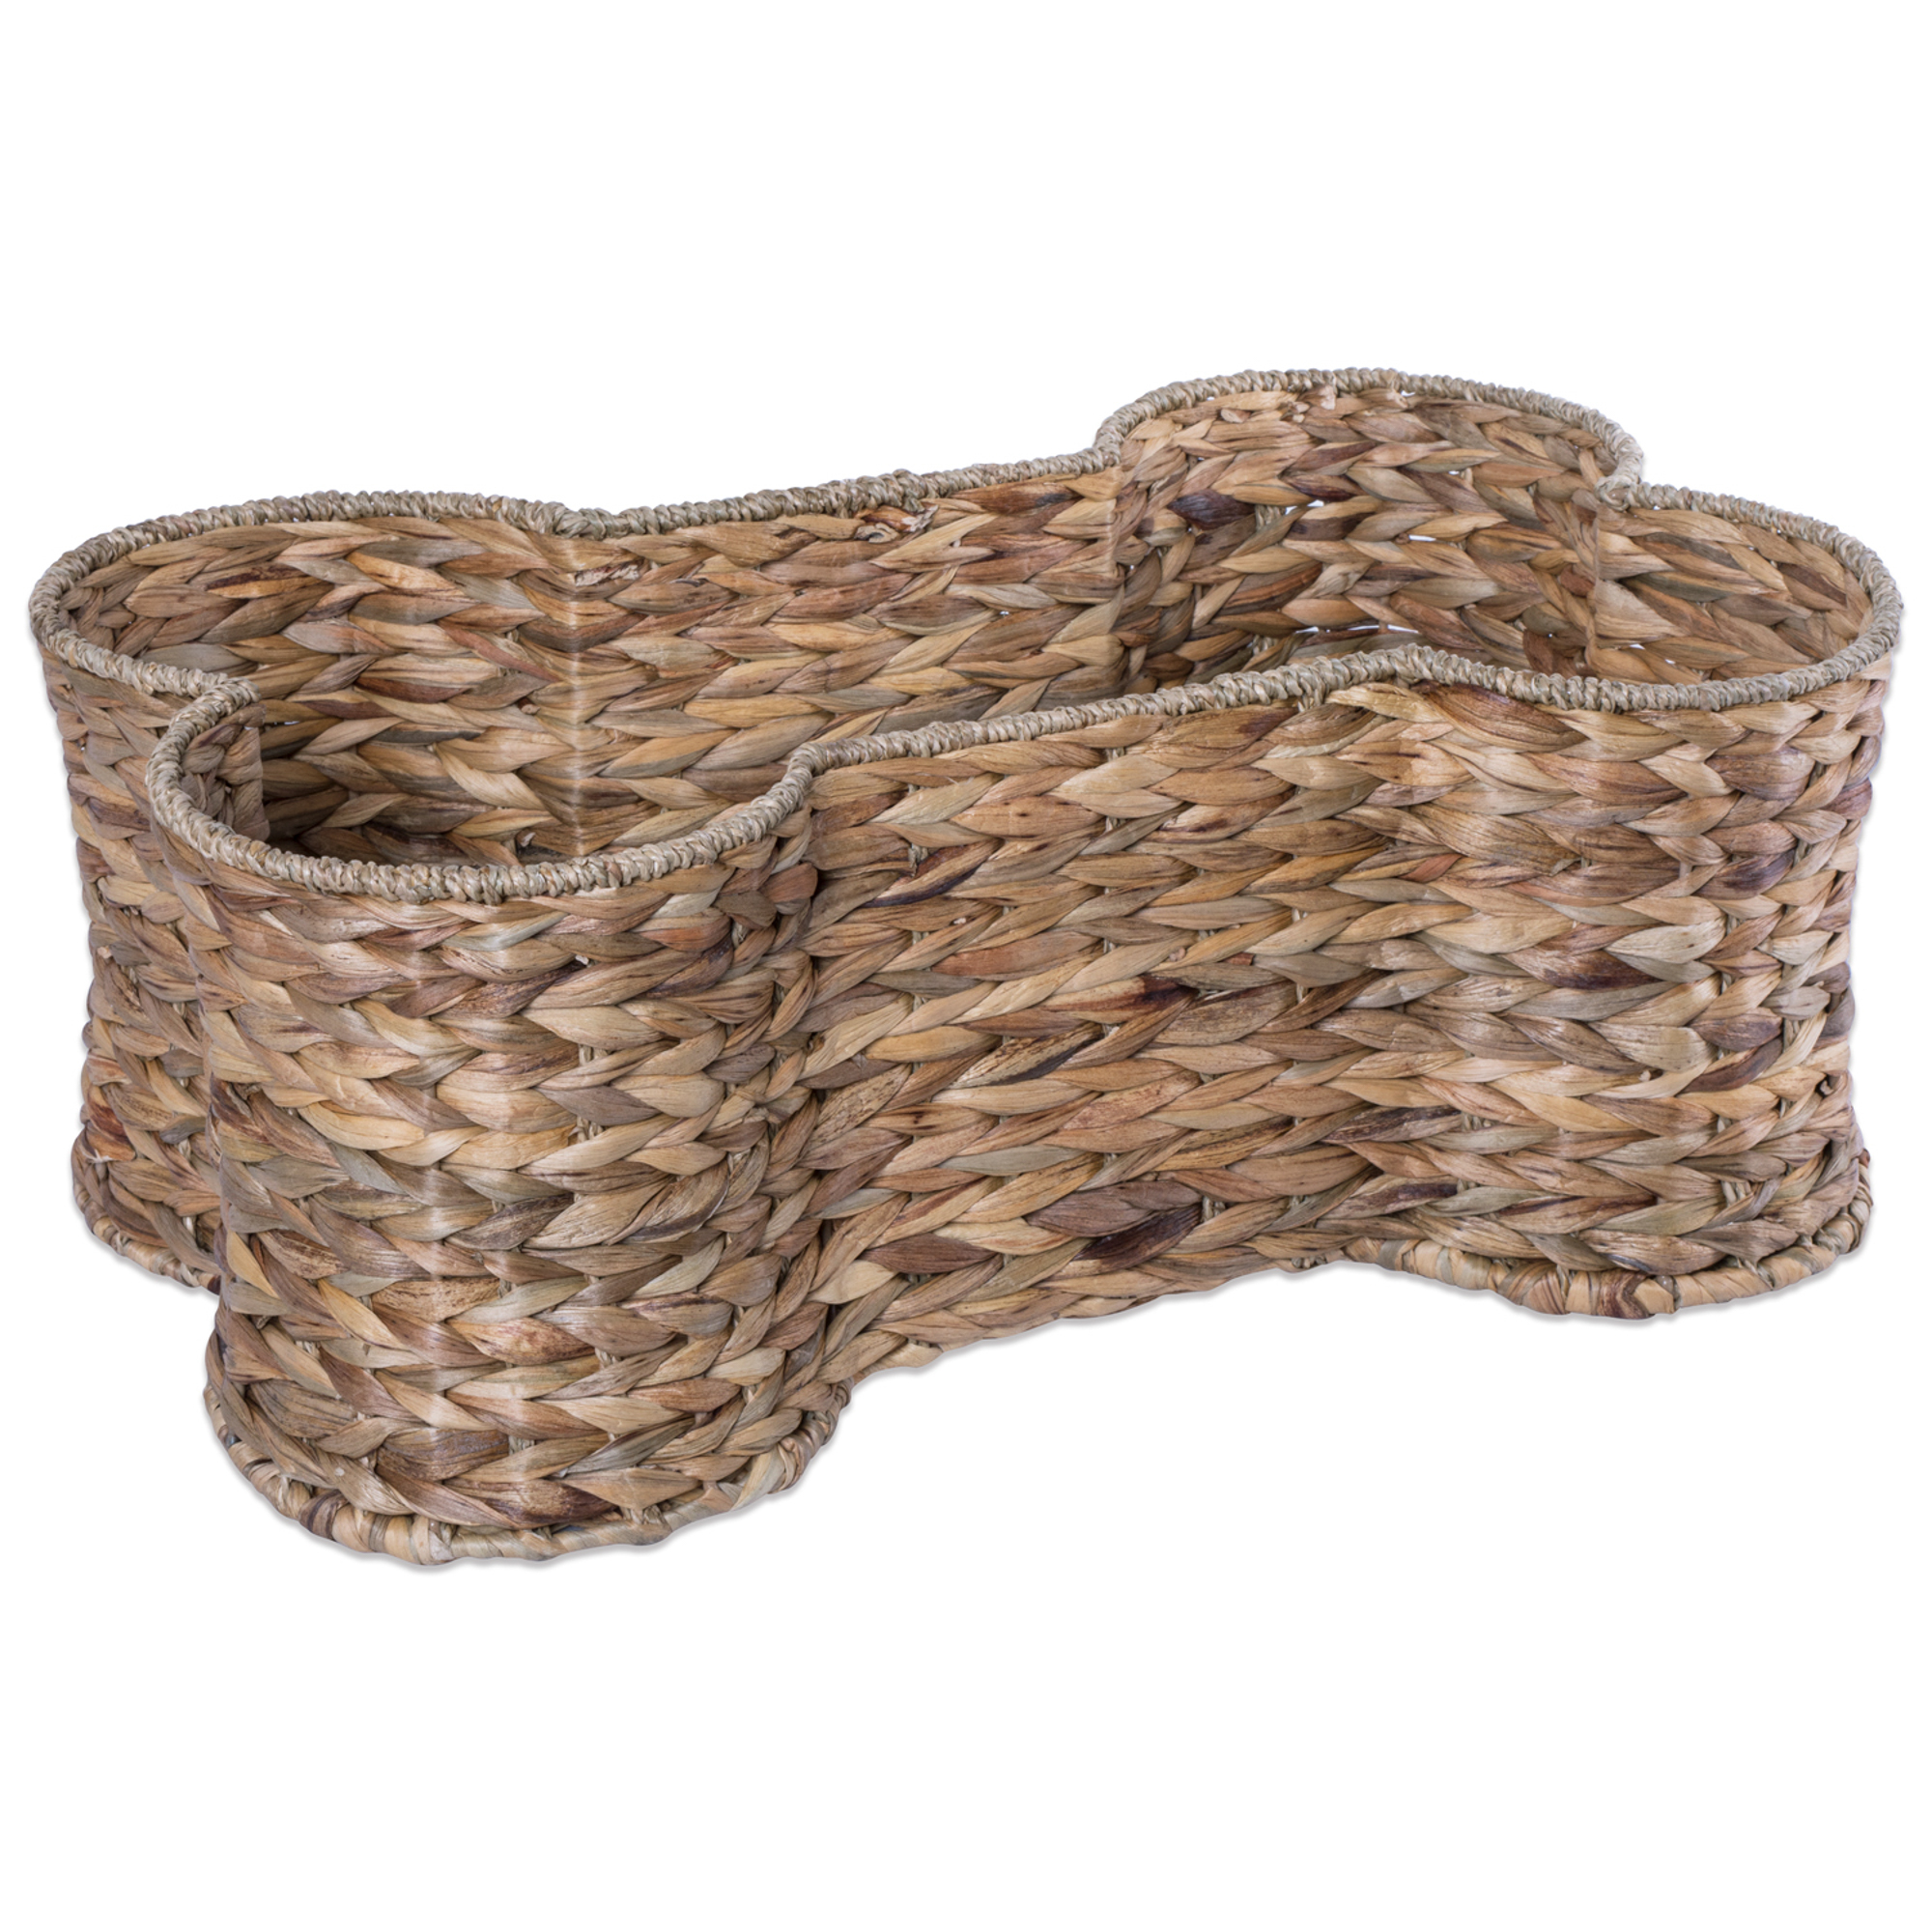 DII Bone Dry Large Hyacinth Bone Shape Storage Basket, 24x15x9", Pet Organizer Bin for Home Decor, Pet Toy, Blankets, Leashes and Food - image 1 of 3